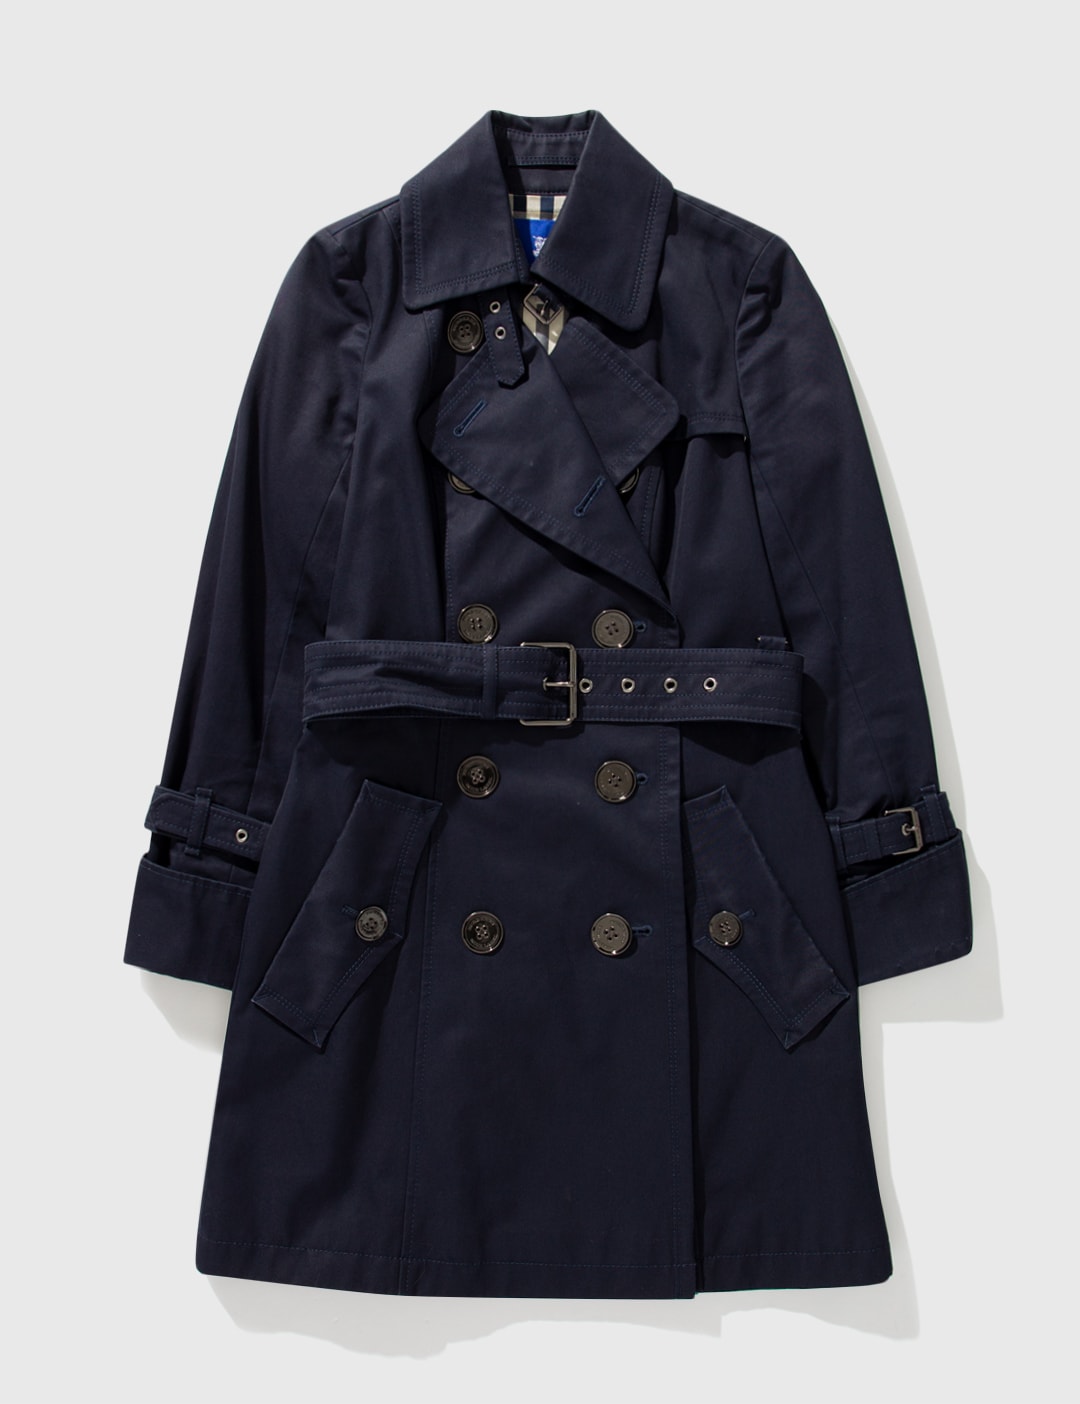 Burberry BURBERRY BLUE LABEL TRENCH COAT | HBX - Globally Curated Fashion and Hypebeast